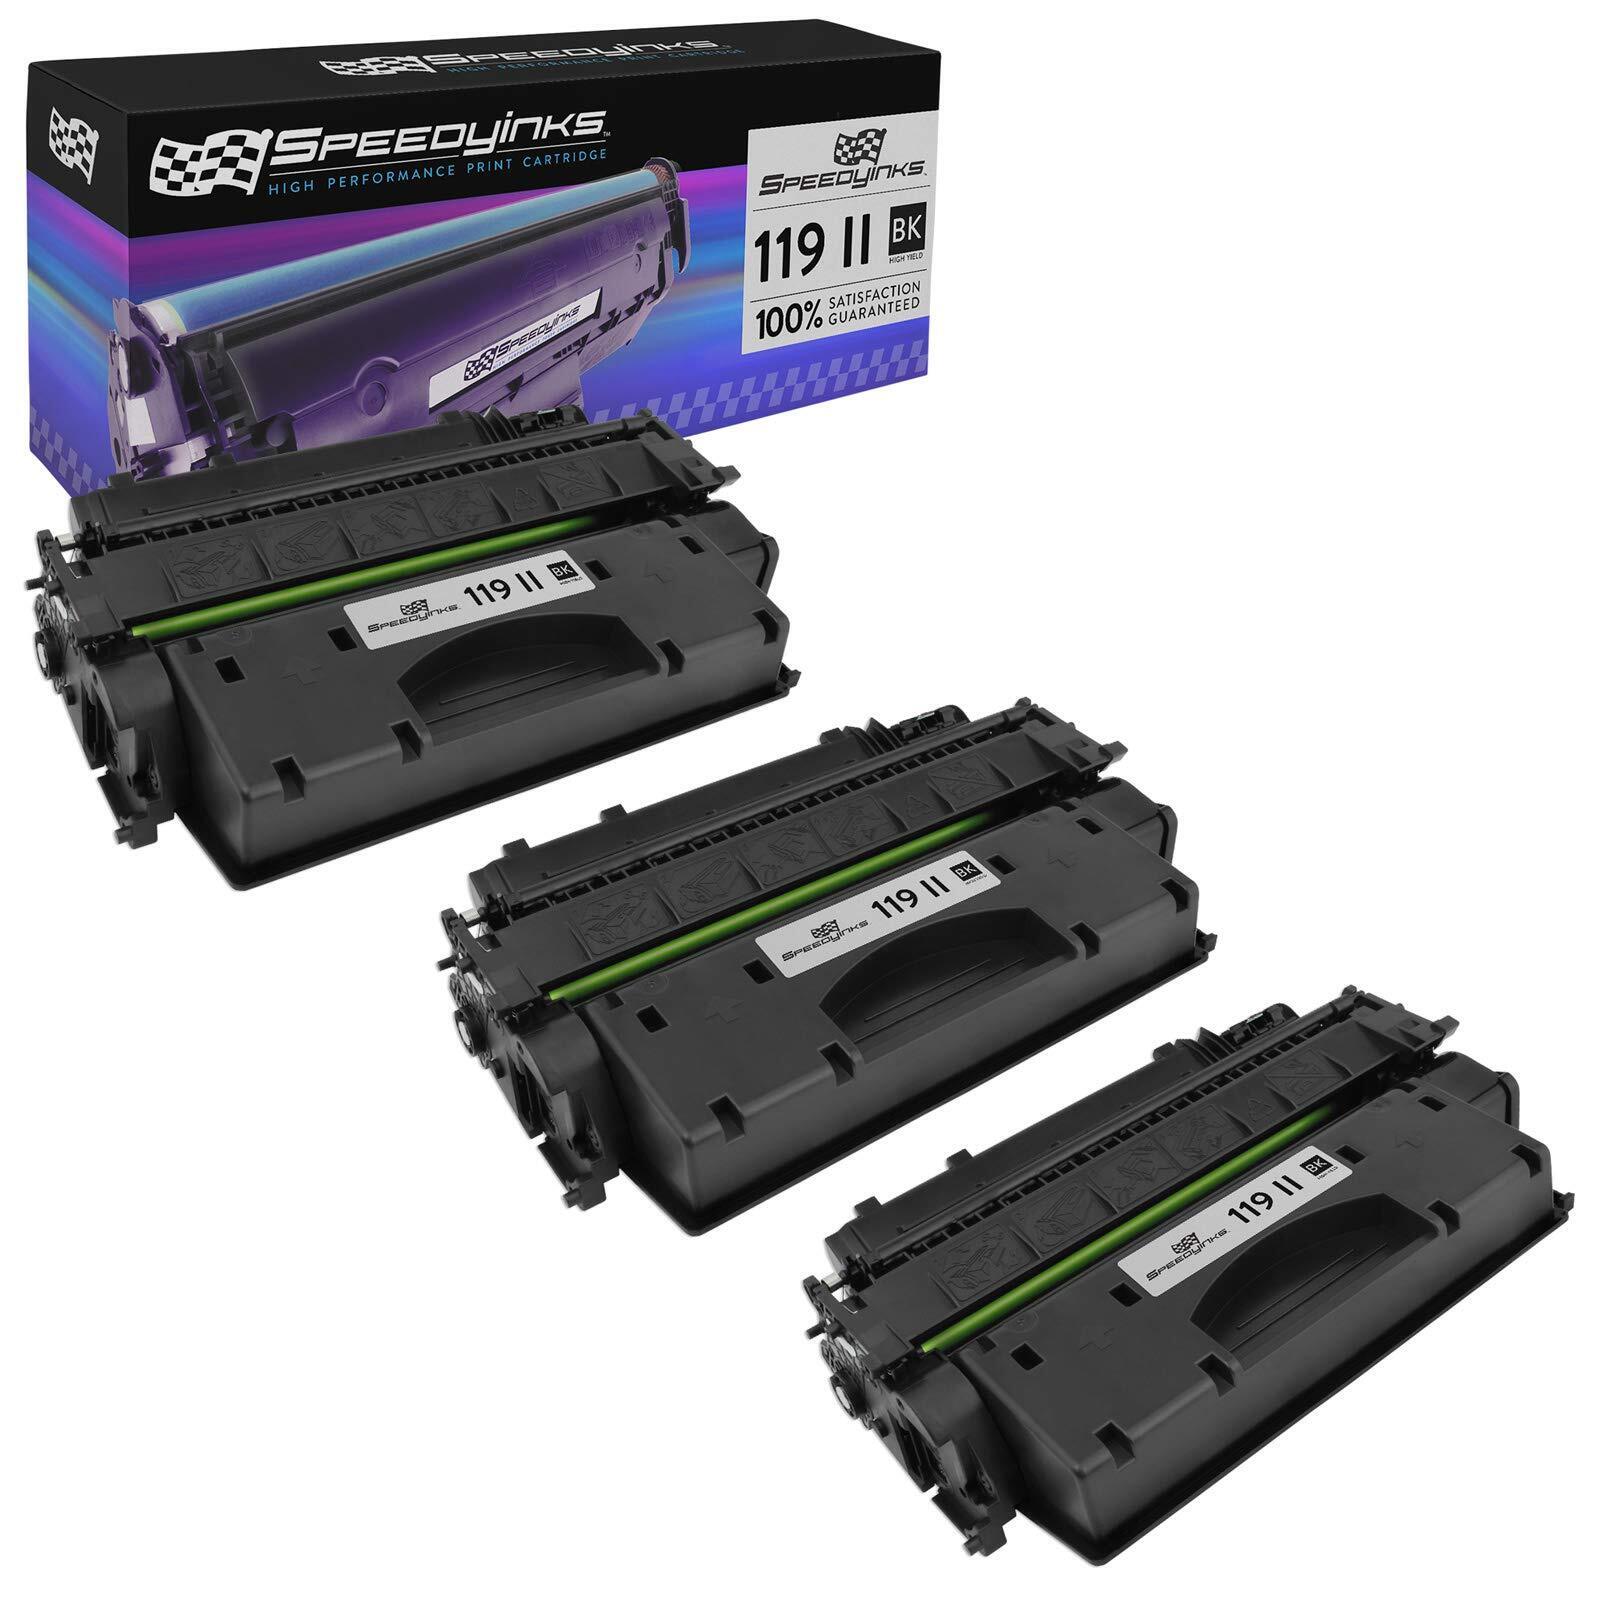 3 Pack Compatible Canon 3480B001AA HY Black Laser Toner for Canon 119 II